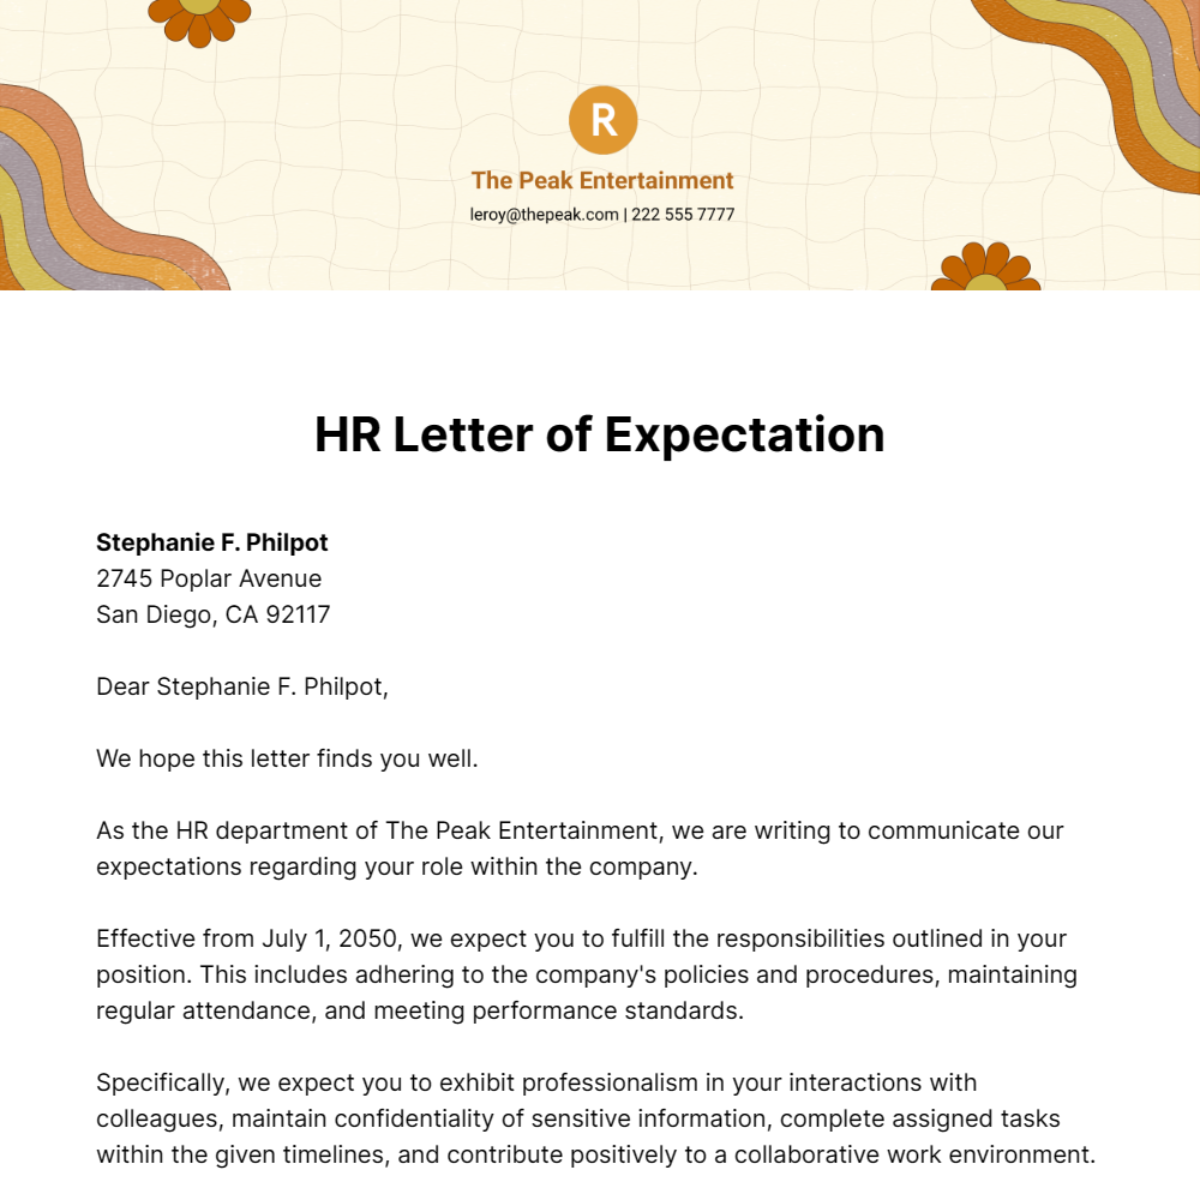 HR Letter of Expectation Template